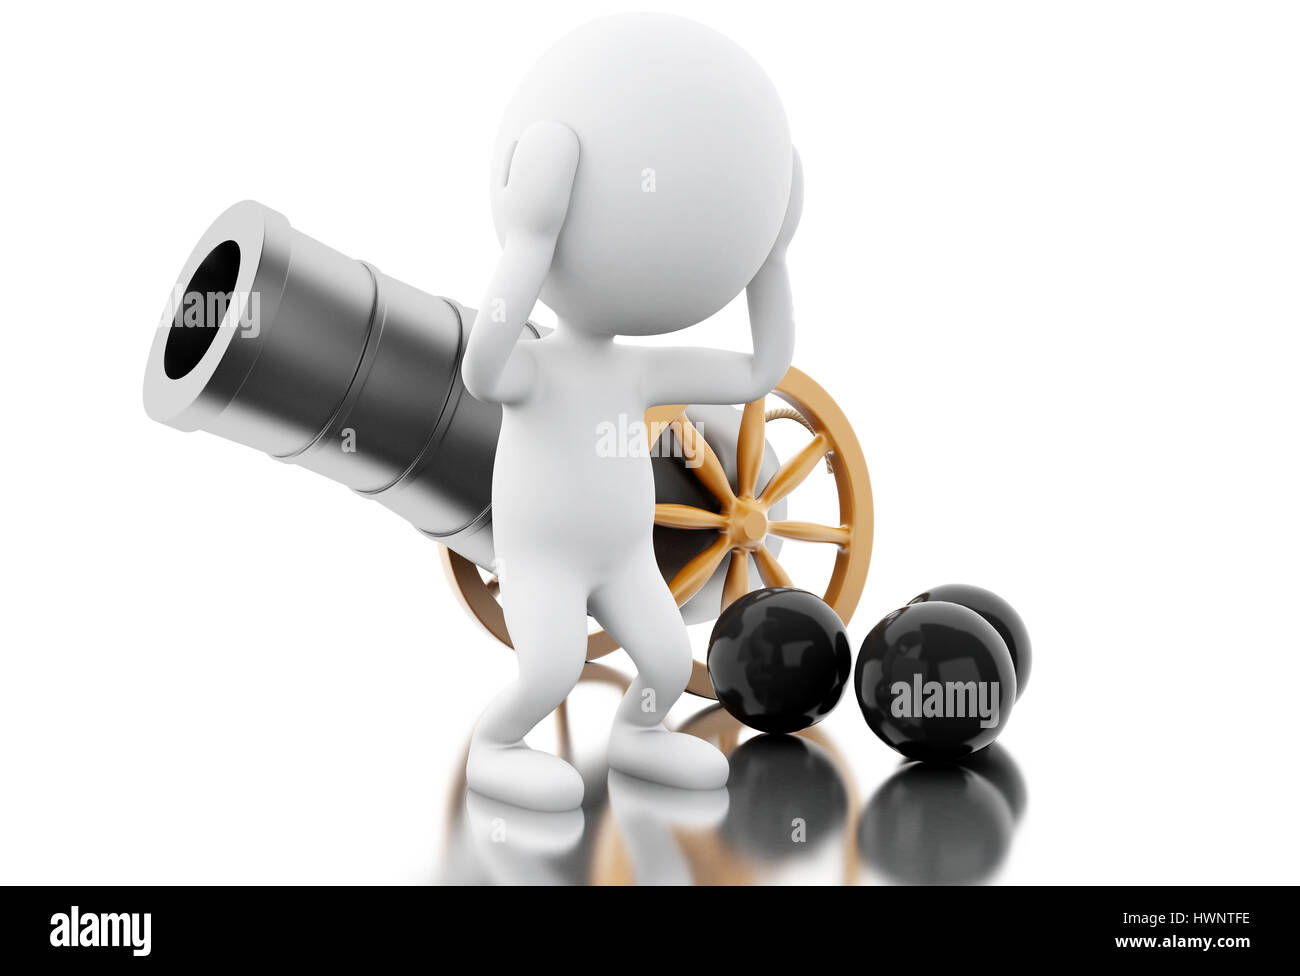 3d illustration. White people with old cannon and cannonballs. Isolated white background Stock Photo